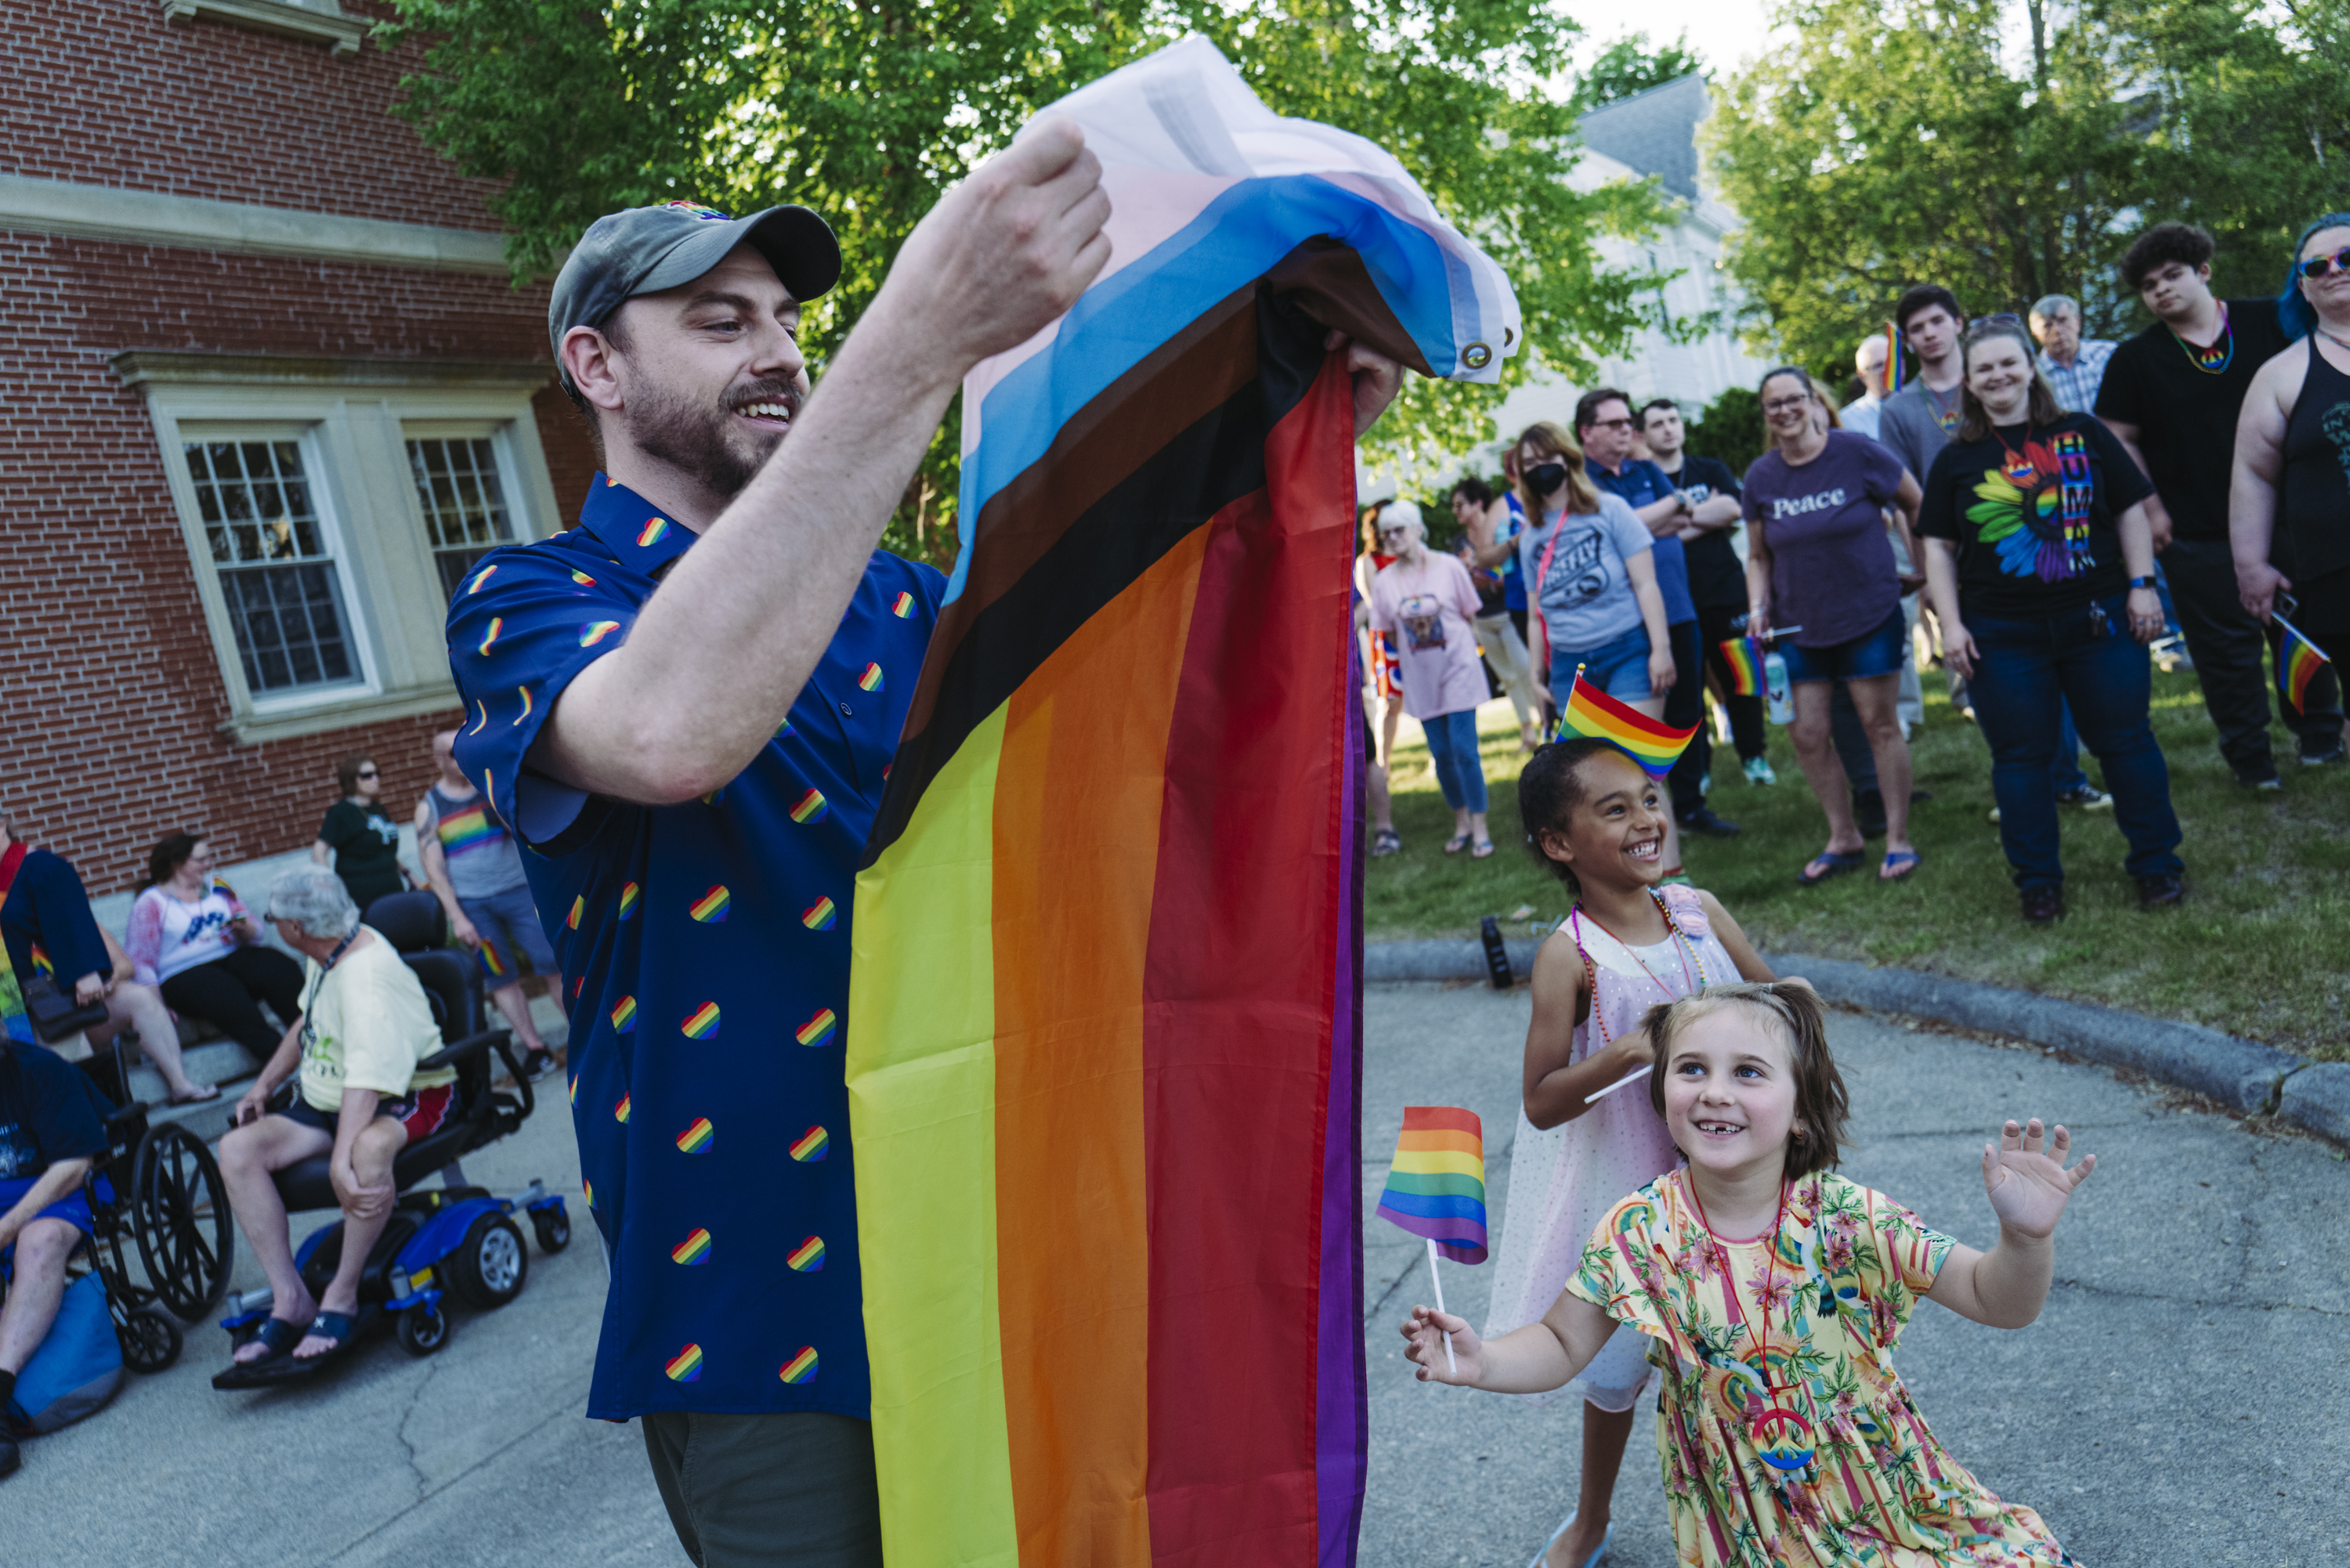 Two Billerica officials criticized for opposing LGBTQ Pride month